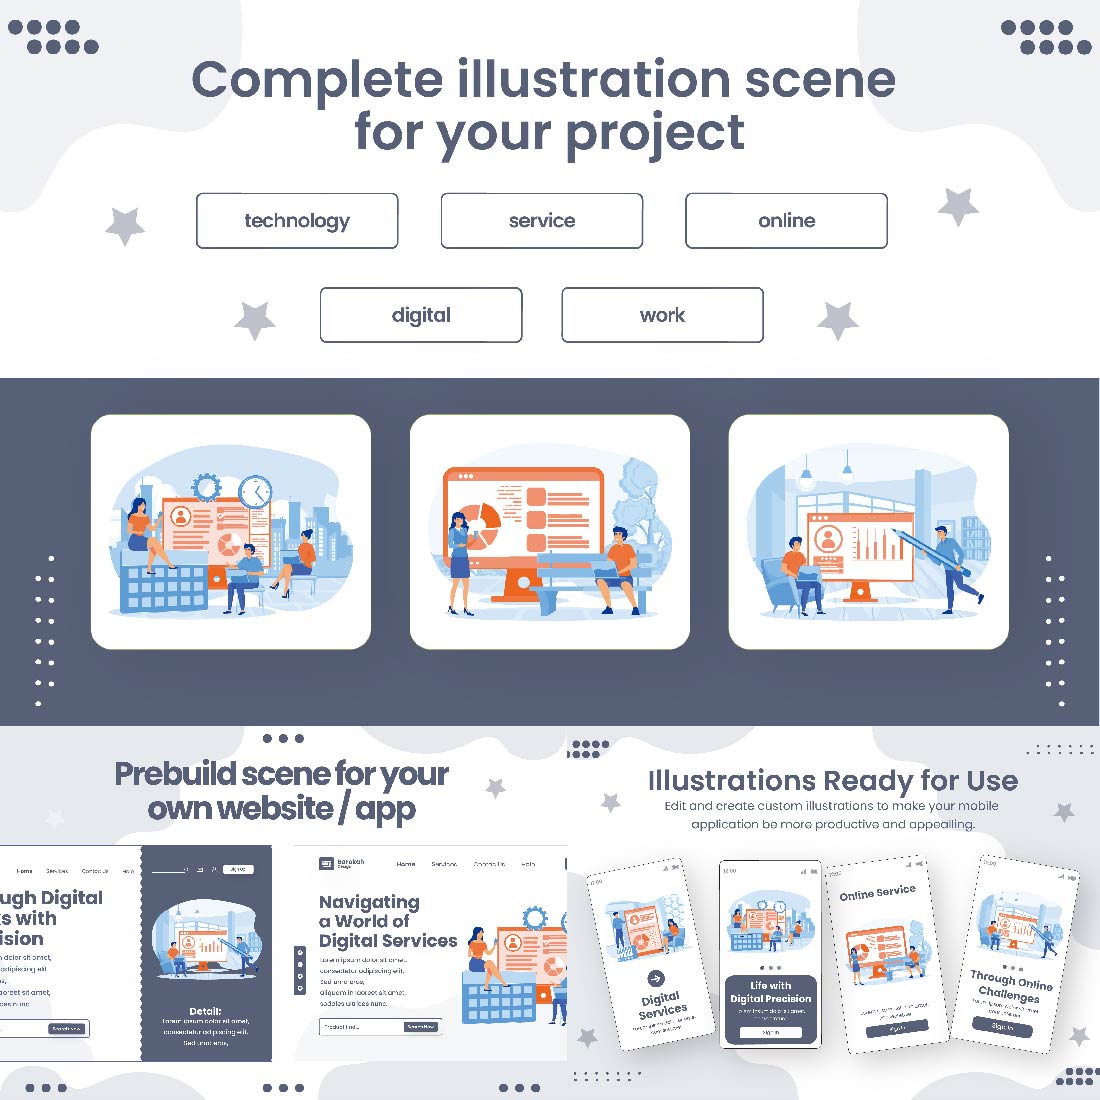 6 Illustrations Related to Online Service 2 preview image.